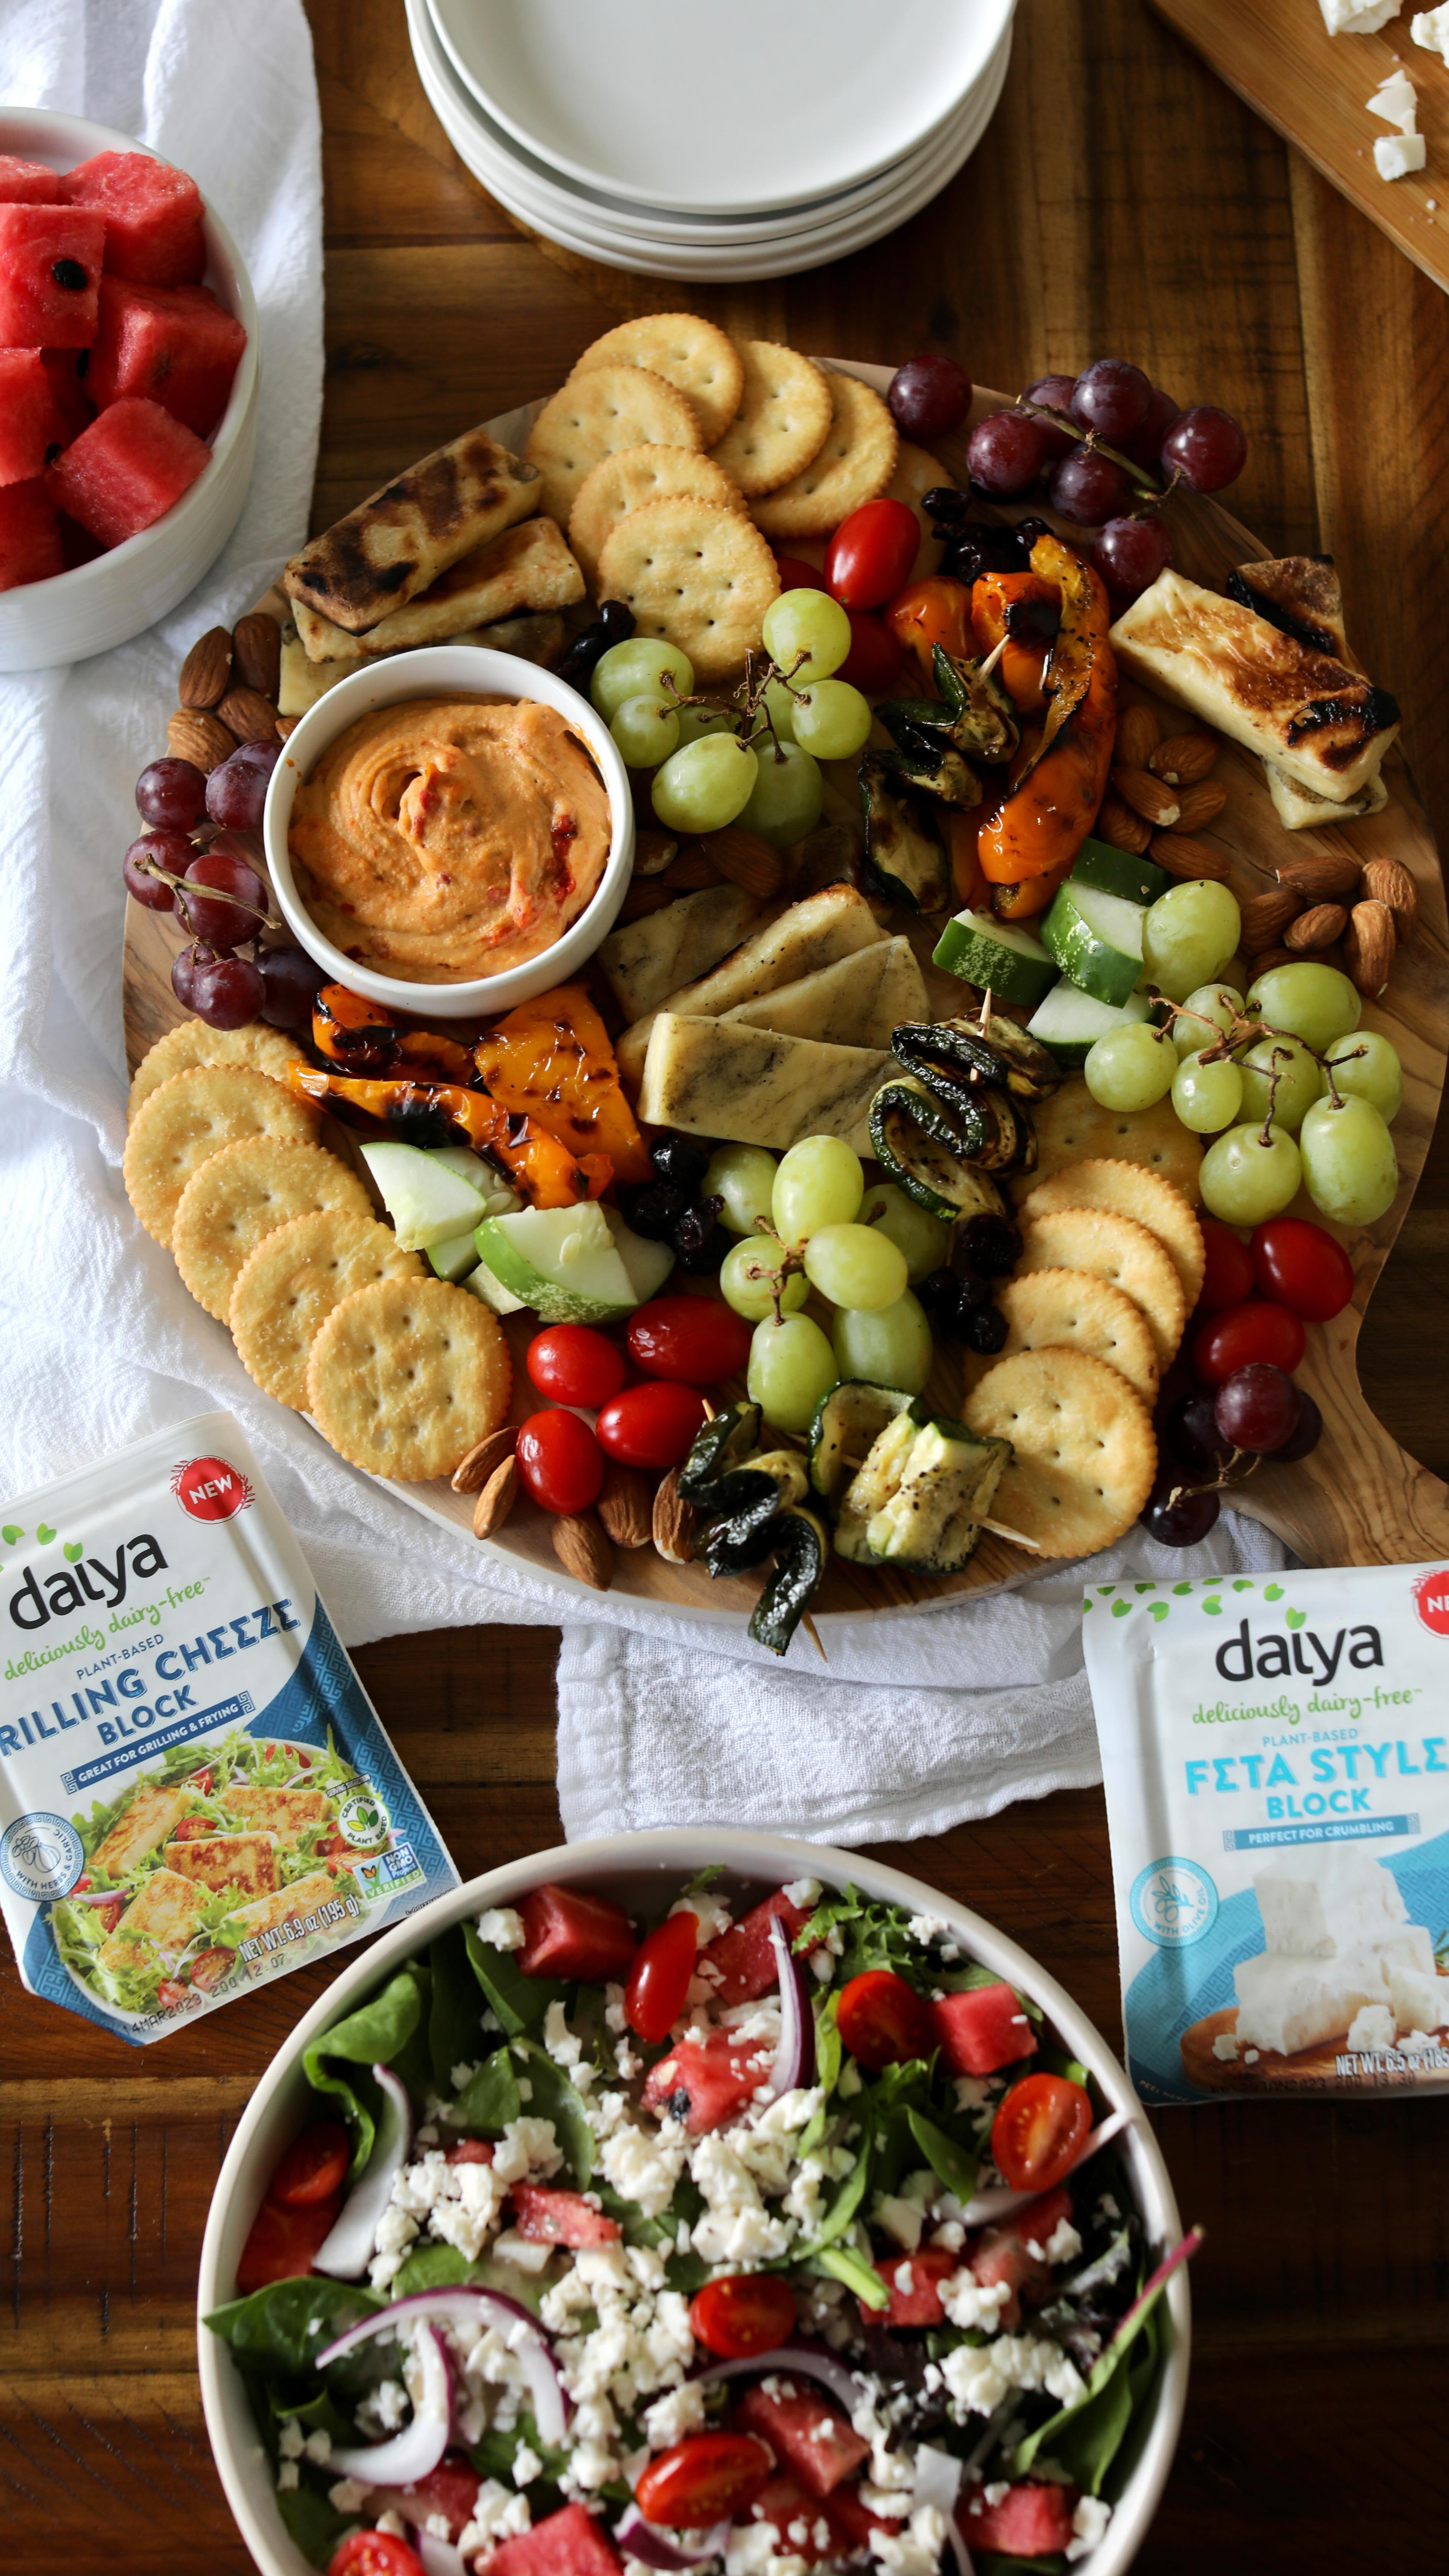 Grilling season 🔥GIVEAWAY🔥, but  make it  e l e v a t e d.😏 [ad]

I've been enjoying plant-based charcuterie boards and non-boring salads every chance I get so I was super excited to partner with @daiyafoods and use their new Grilling Cheeze and Feta Style Block to whip up something special!

I love that their new #vegan cheese offerings are so easy to use and give me the taste I'm looking for whenever I'm in the mood for something cheesy! Got me over here feelin' so fancy!💁🏾‍♀️ 

I want you to be able to experience all this cheesy goodness too and to be able to BYOB (Bring Your Own Block!) to your next cookout so we're doing a GIVEAWAYYYY! 🥳🥳

THREE lucky winners will have the chance to win the ULTIMATE Plant-Based Summer Grill Pack! Enter to win a summertime supply of Daiya Cheeze + a Traeger Grill! 

How to enter:
🧀 Must be following @daiyafoods AND @icanyoucanvegan
🧀 Tag 2 friends in the comments below
🧀 Share this post to your stories for a BONUS entry!

The winners will be announced in my stories on Monday, August 15 so be sure to enter NOWWWW! 🙌🏾